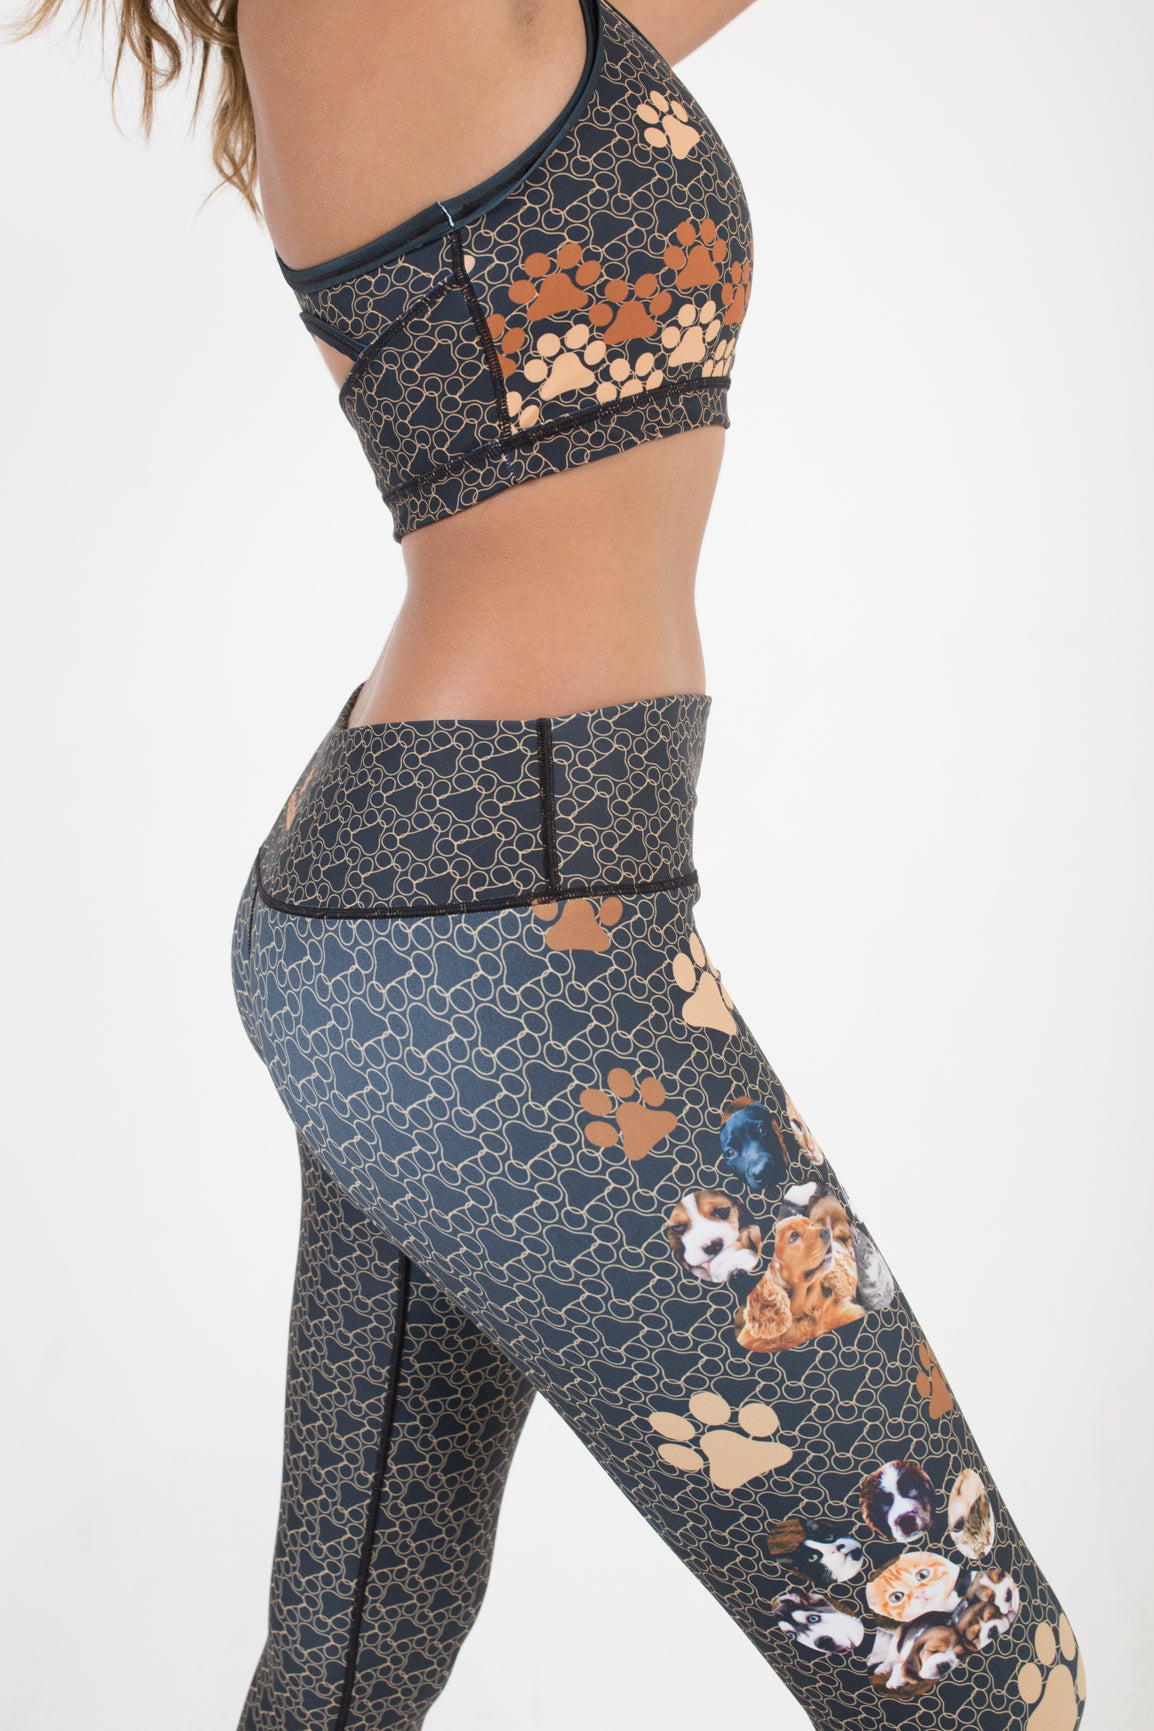 PUPPIES AND KITTENS LEGGINGS L004 - Escala Activewear